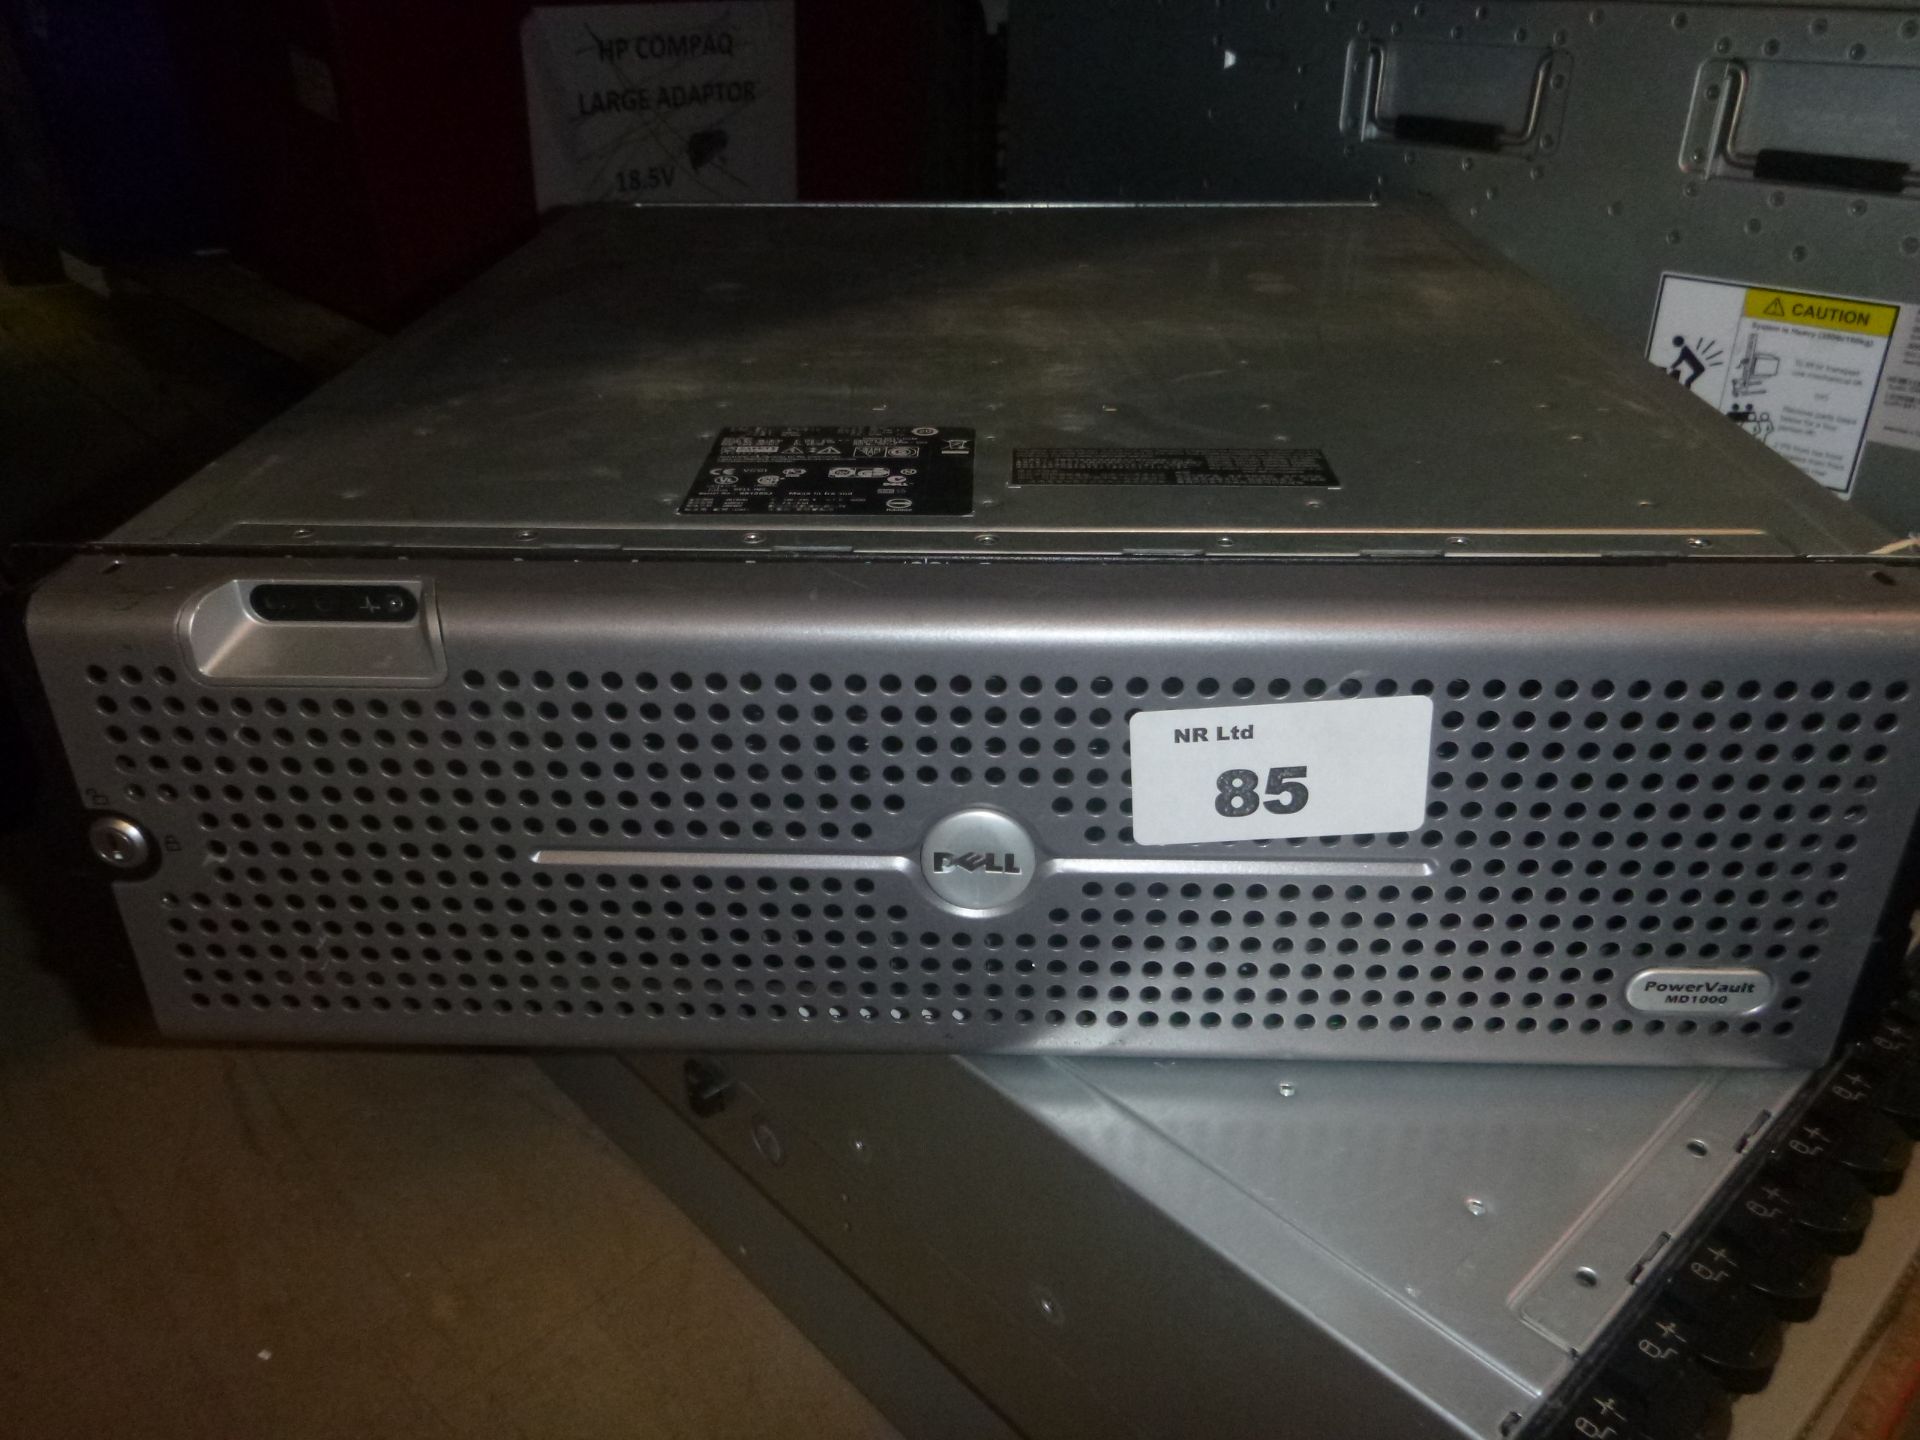 Dell PowerVault MD1000 14 Bay HDD Array with 2 PSU's. 12 X 146GB 3.5" SAS HDD'S & 2 X 300GB 3.5" SAS